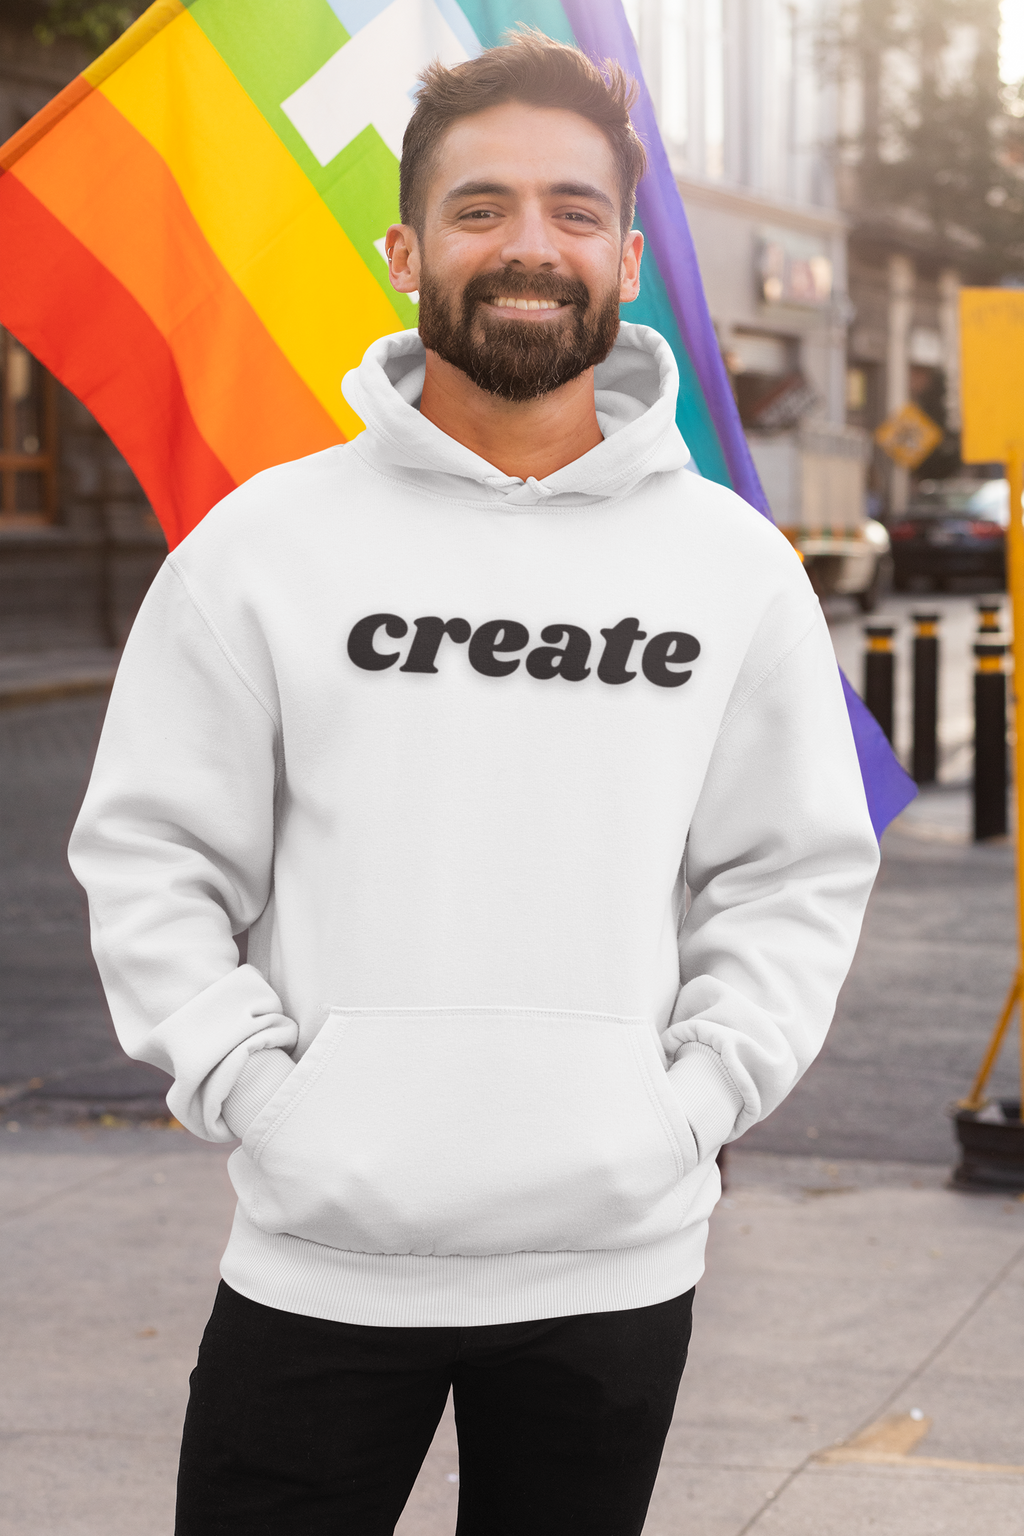 Create Unisex Hooded Sweatshirt, Classic Fit, Gift Item - Cheers Together Gift House